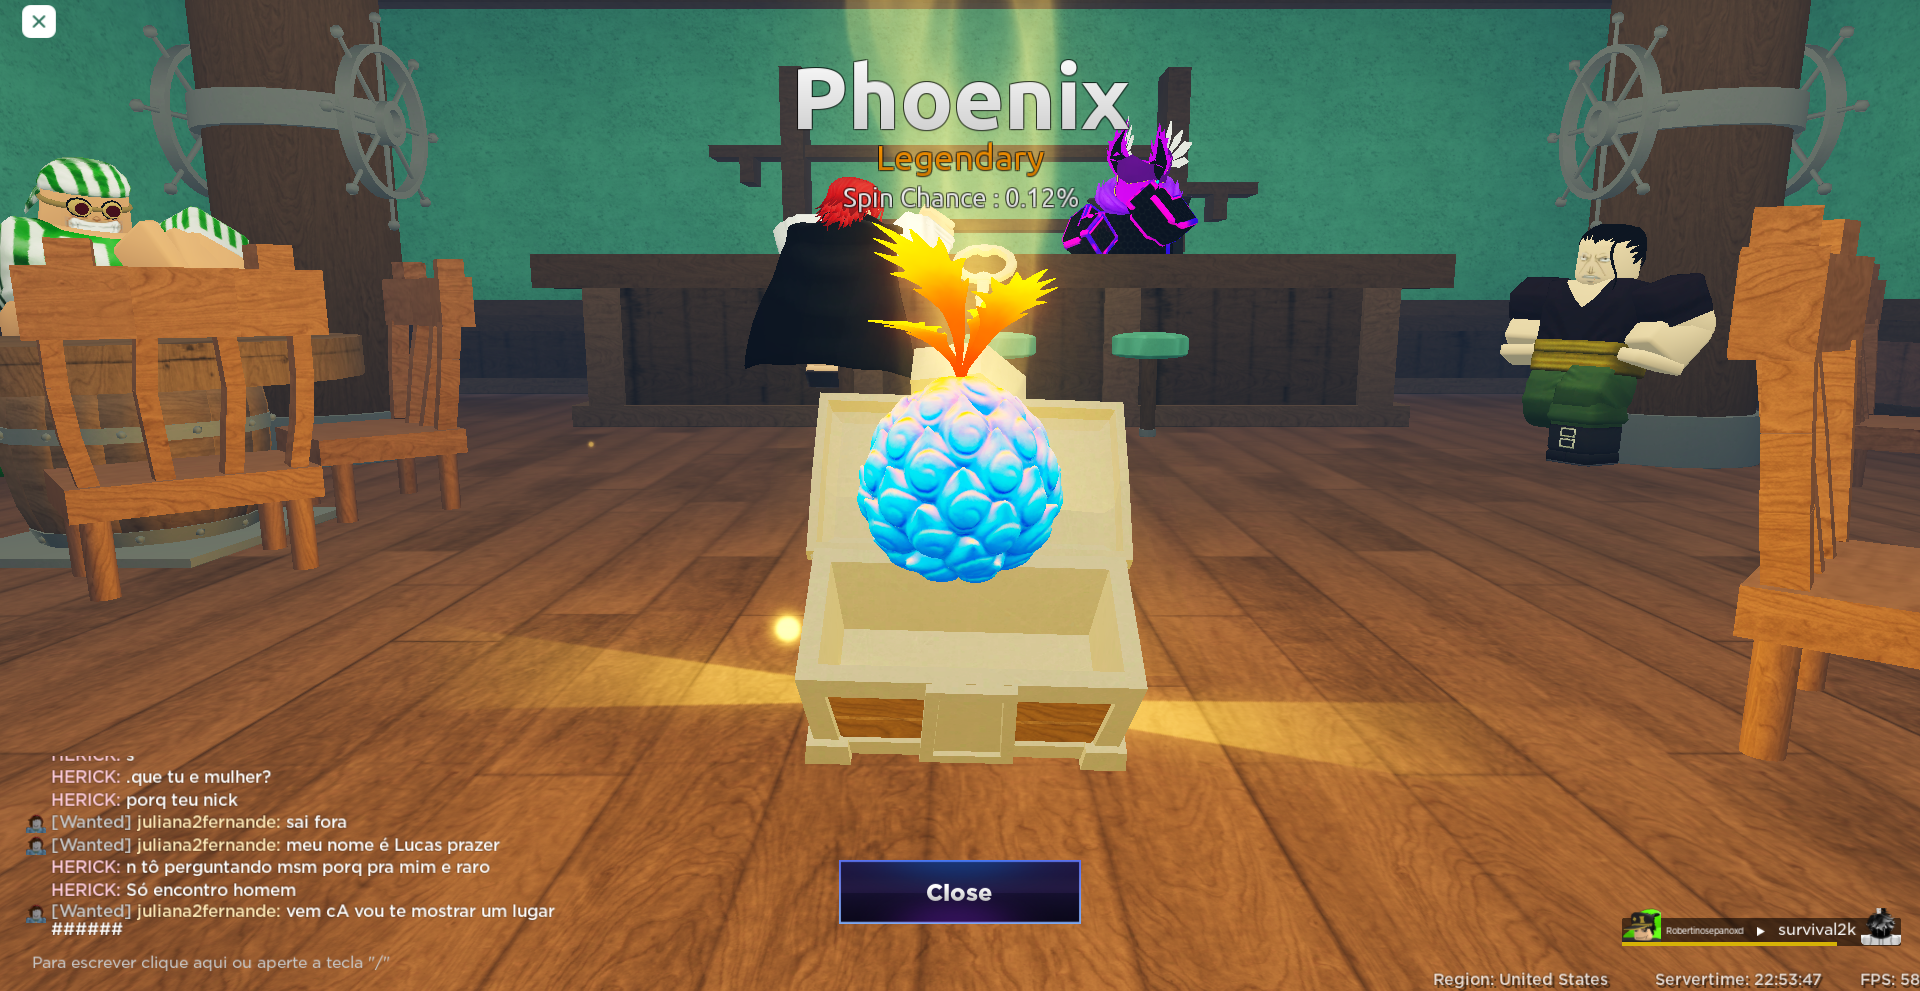 I did not know it was in my hotbar, luckily i asked a admin to restore, fruit battlegrounds phoenix drop